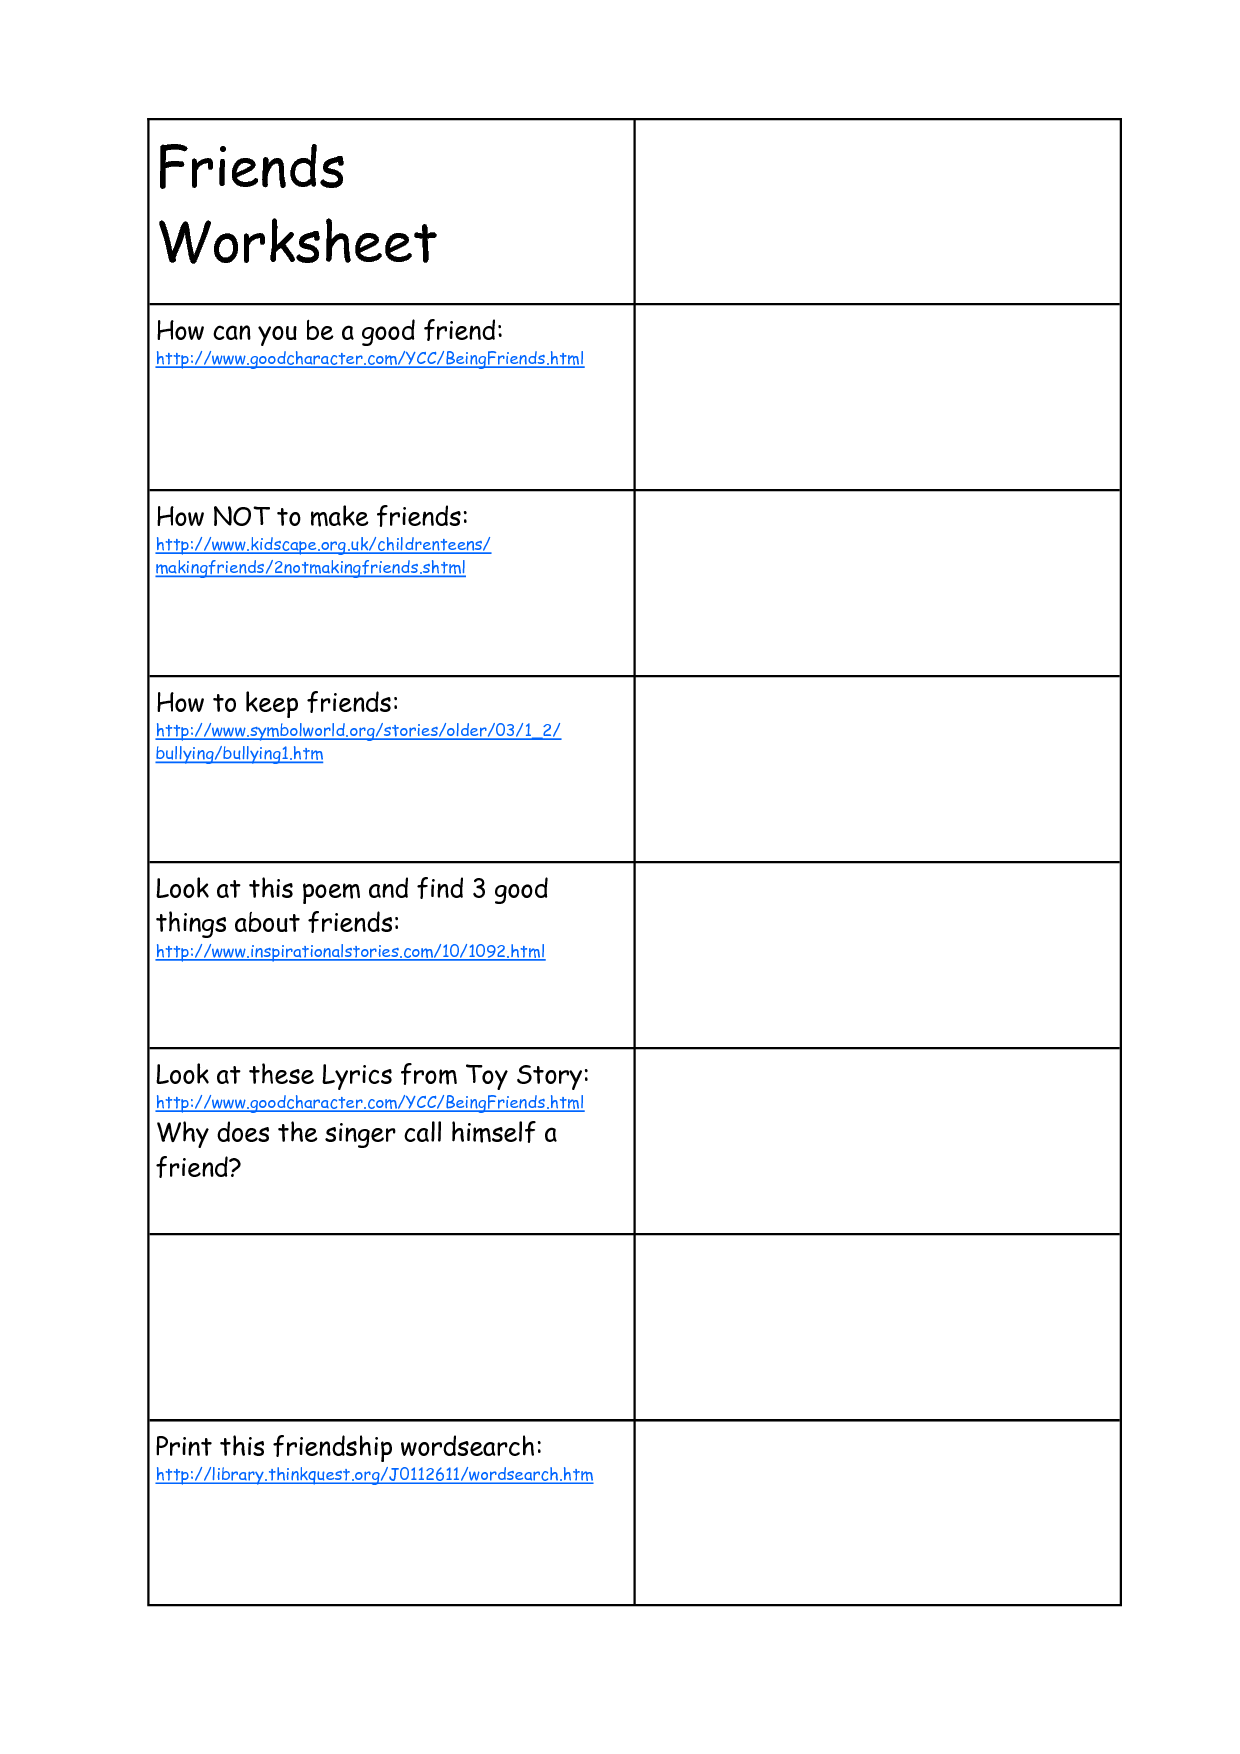 15 Best Images of Find A Friend Worksheet All About My Friend